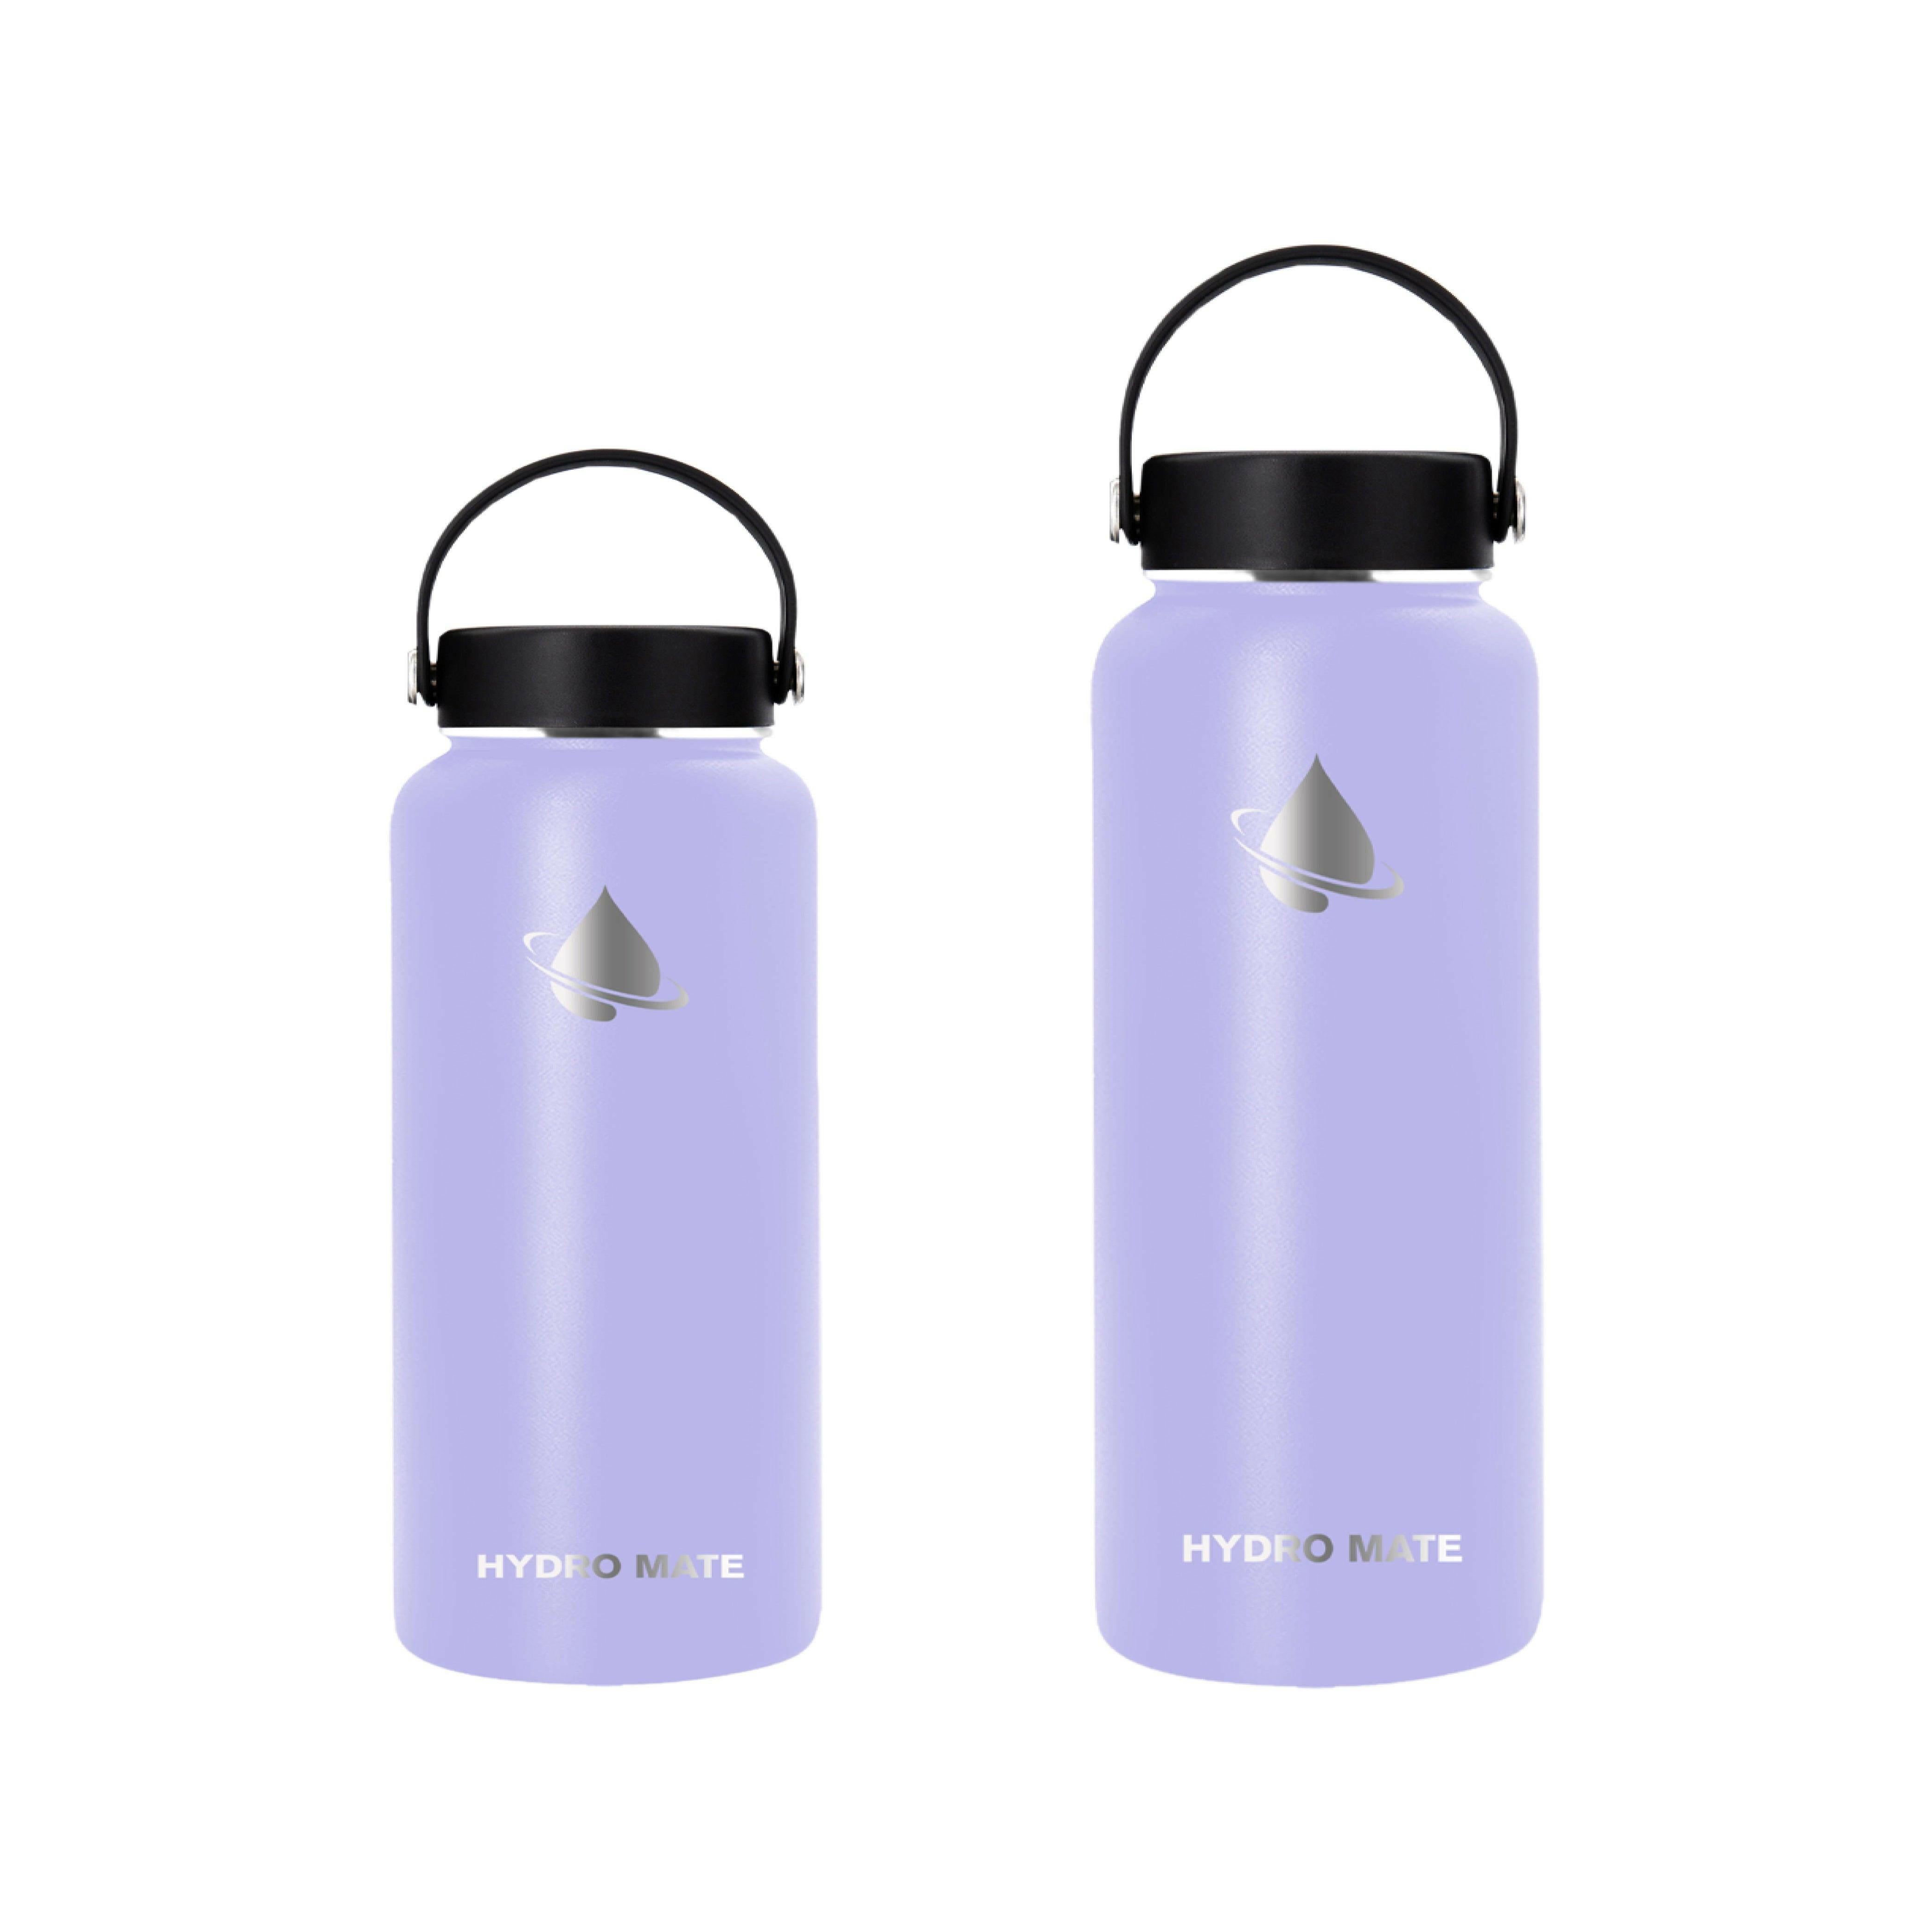 Hydro Mate Insulated Stainless Steel Water Bottle Lavender | Stainless Steel Water Bottles | Brilliant Home Living